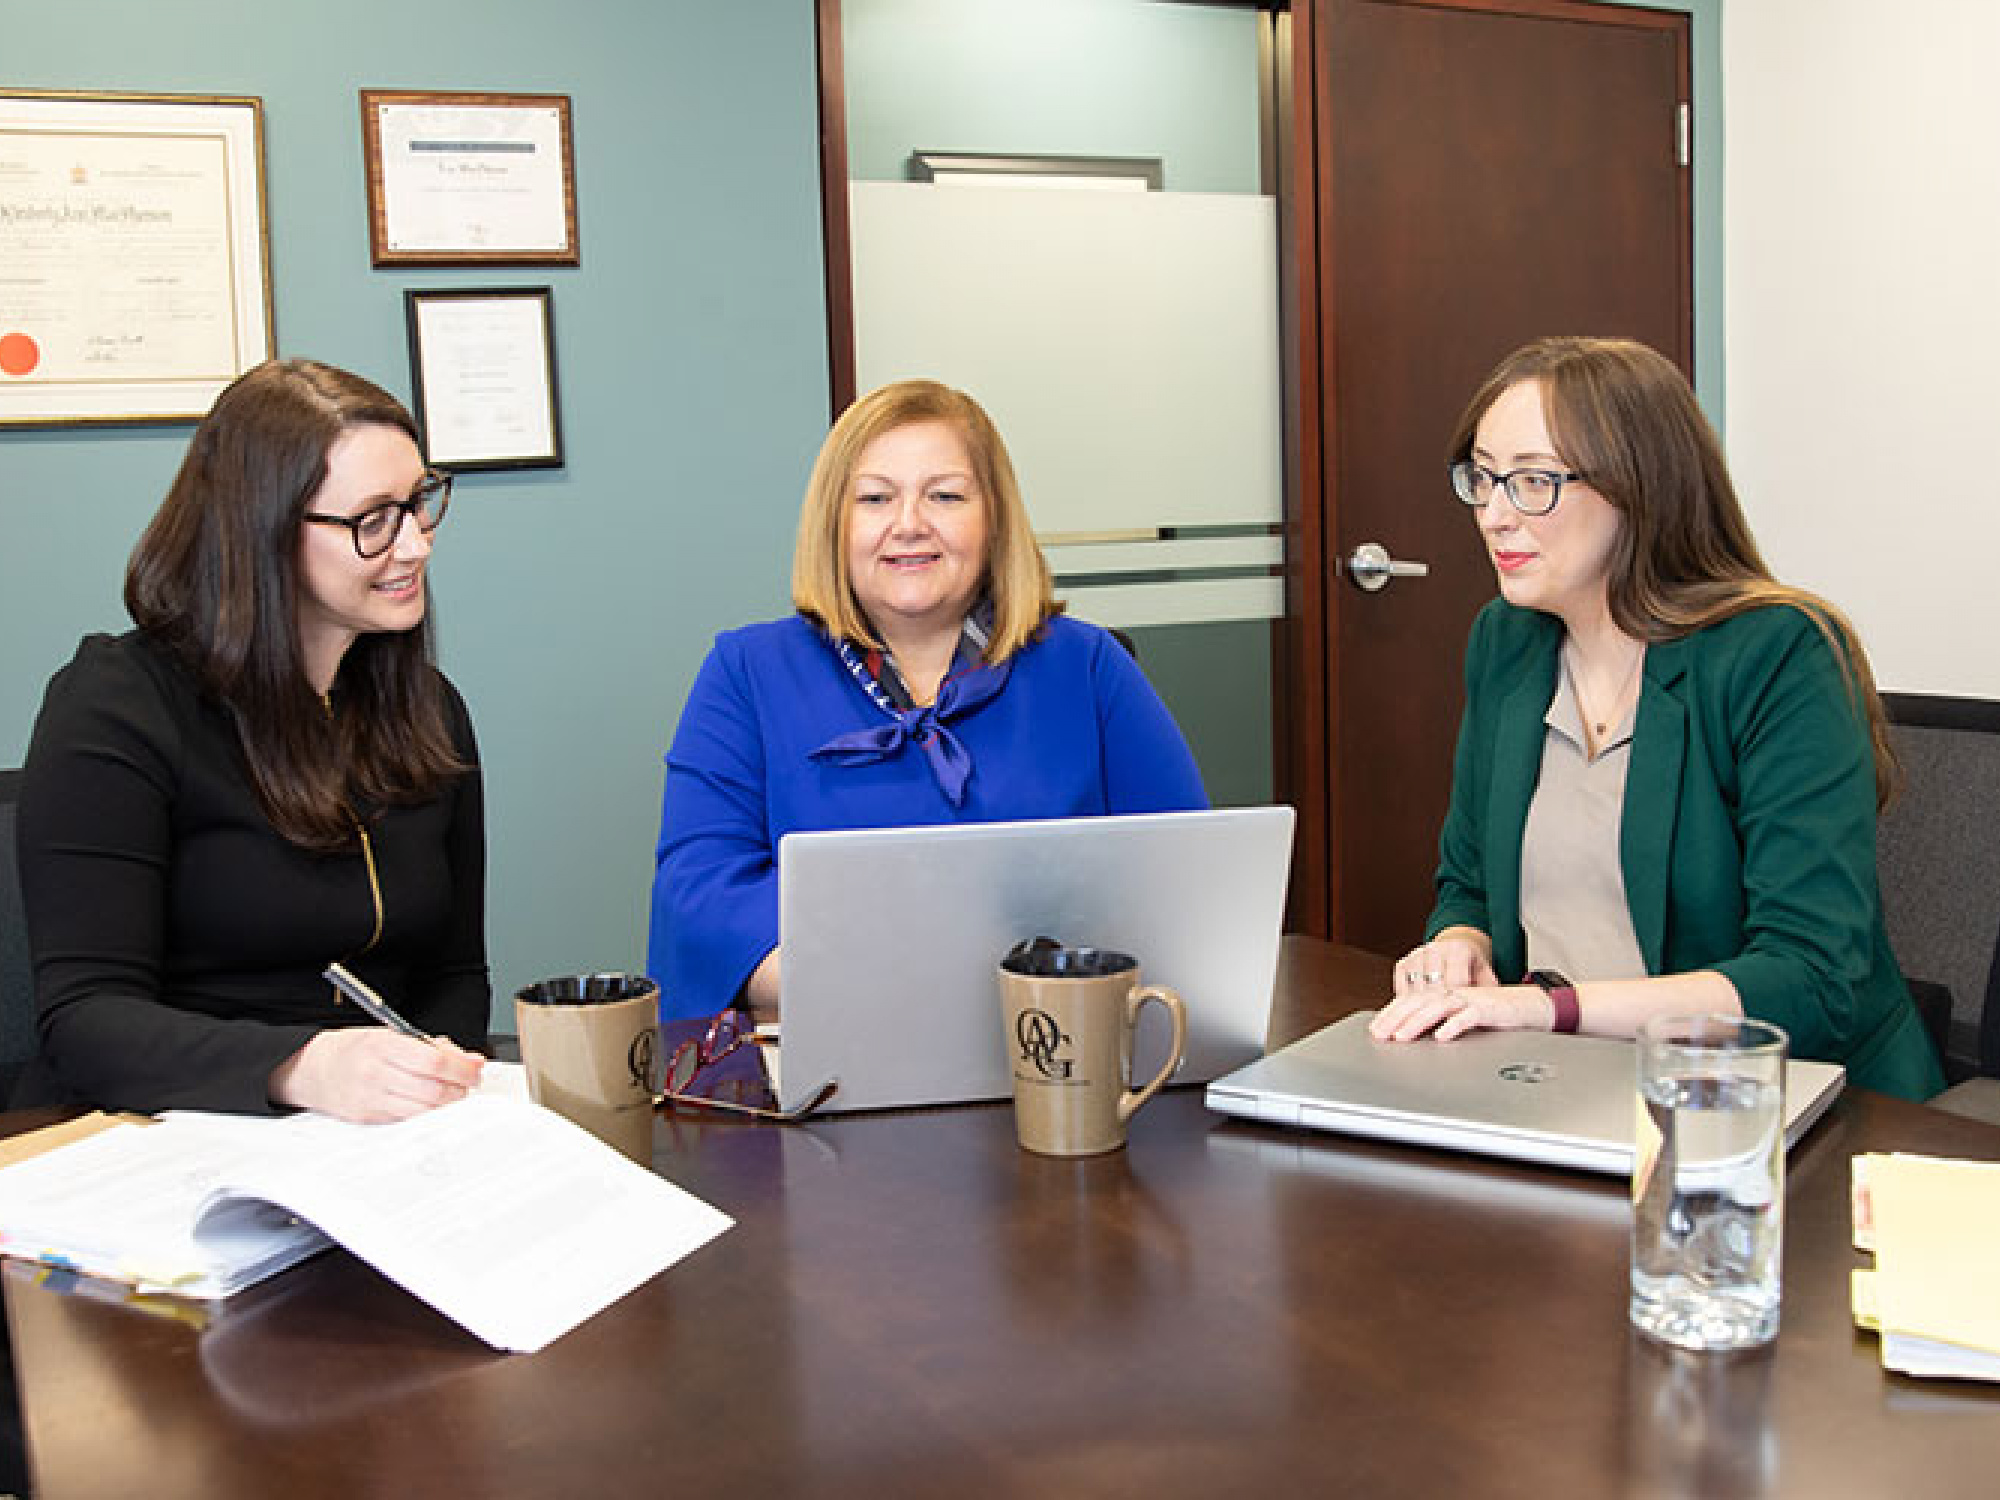 Three women in office reviewing resumes on laptop.